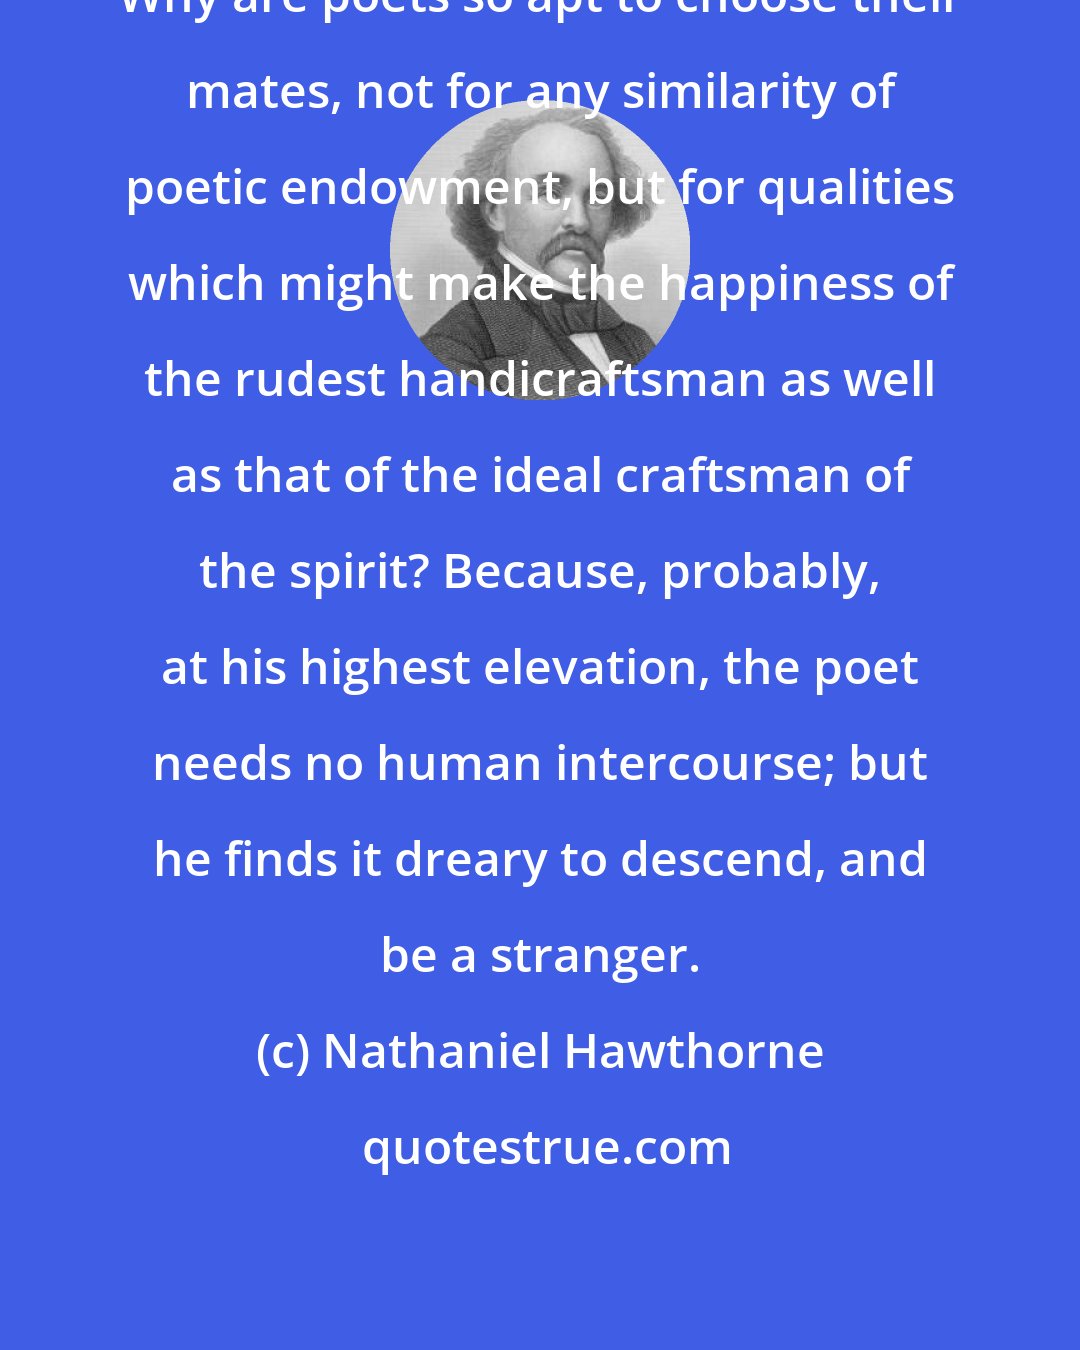 Nathaniel Hawthorne: Why are poets so apt to choose their mates, not for any similarity of poetic endowment, but for qualities which might make the happiness of the rudest handicraftsman as well as that of the ideal craftsman of the spirit? Because, probably, at his highest elevation, the poet needs no human intercourse; but he finds it dreary to descend, and be a stranger.